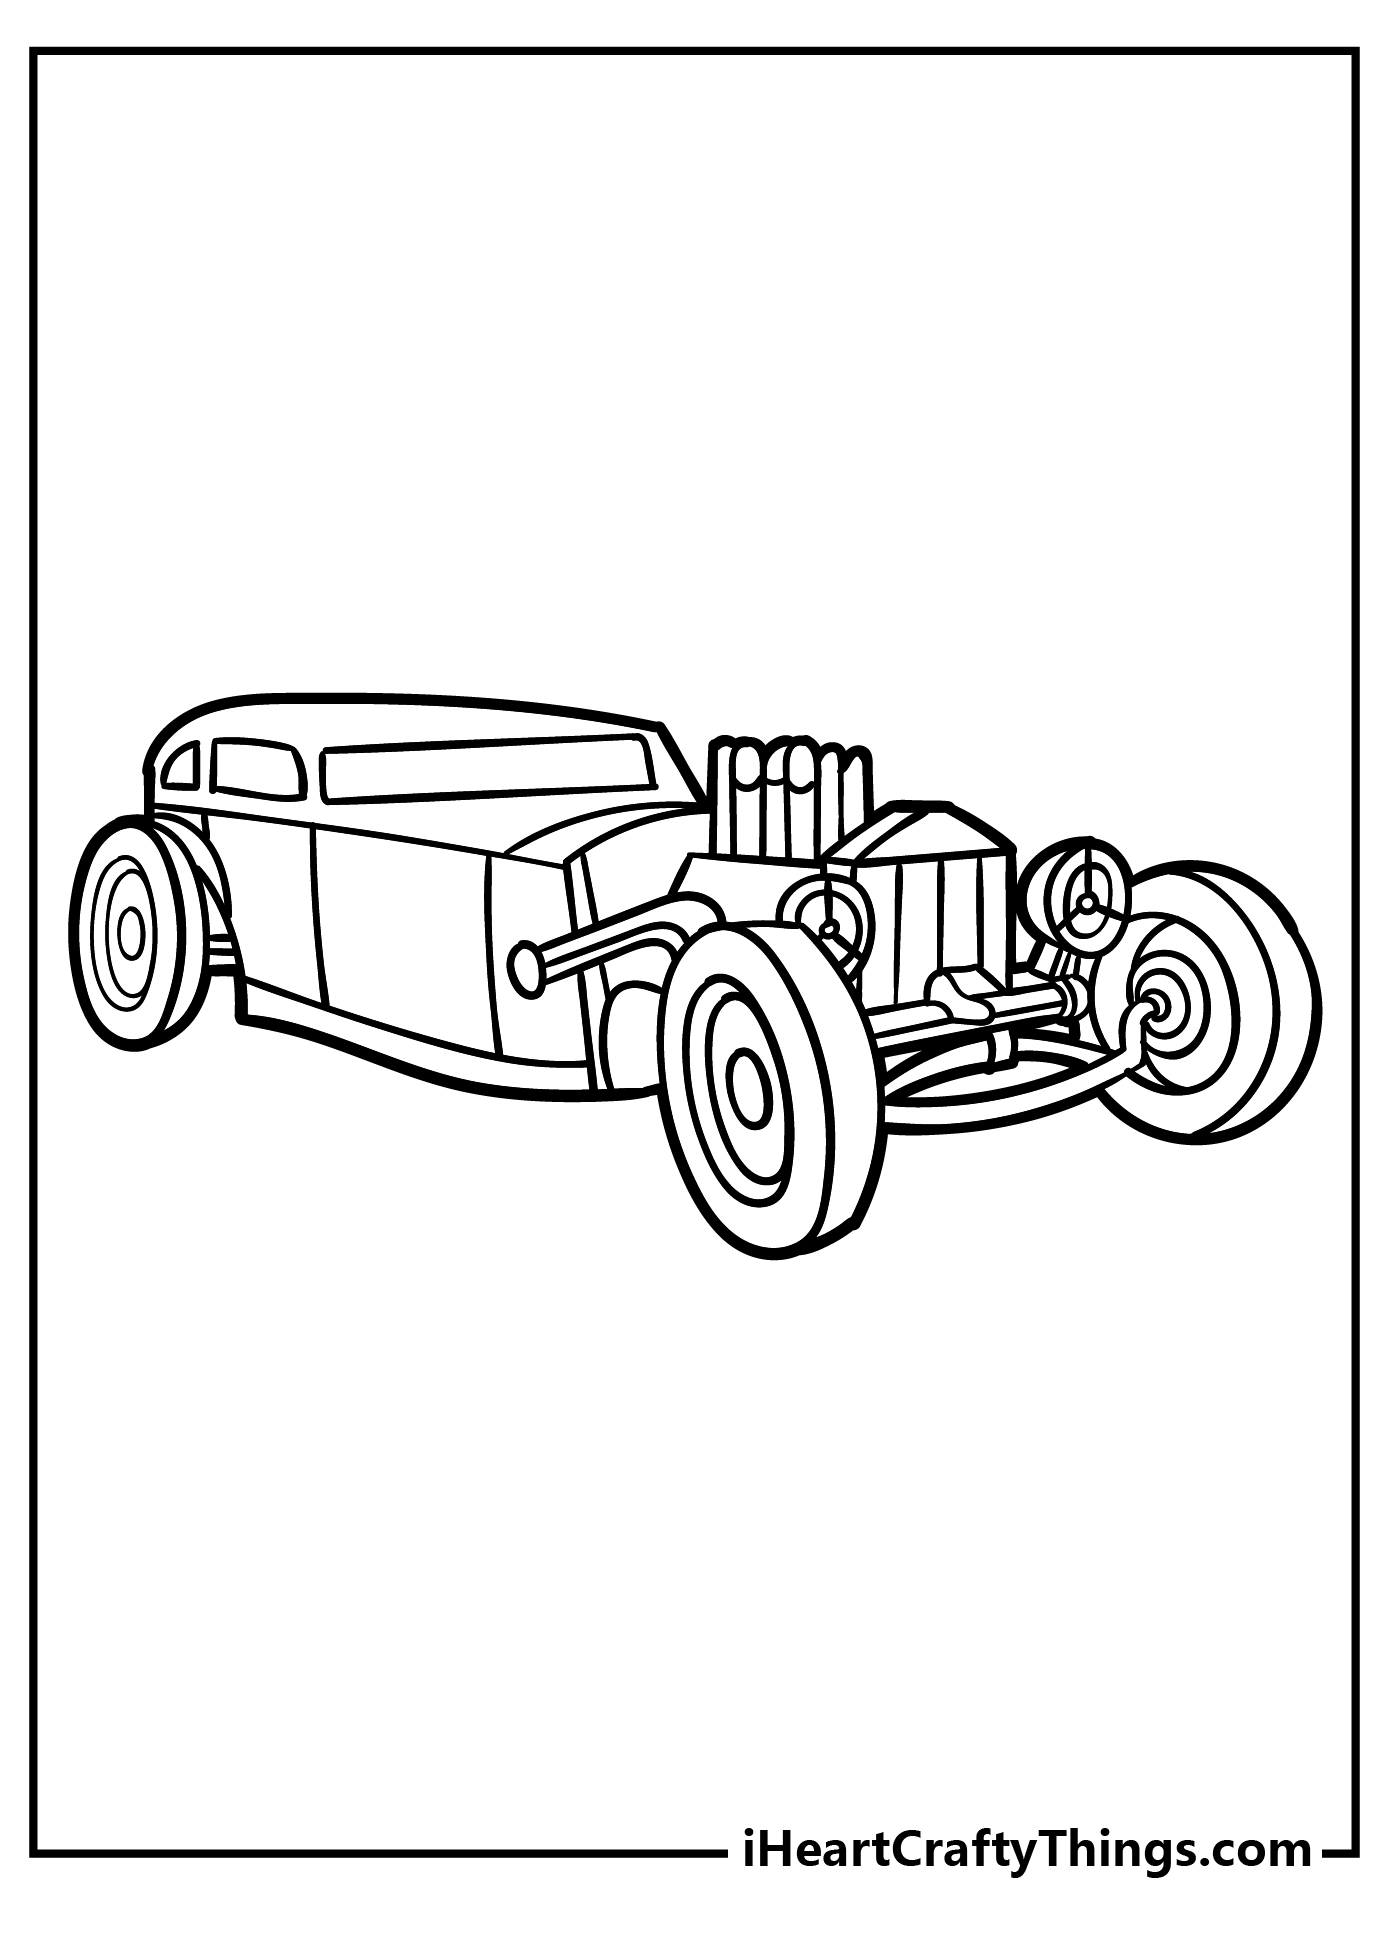 Hot Rod Coloring Book for adults free download